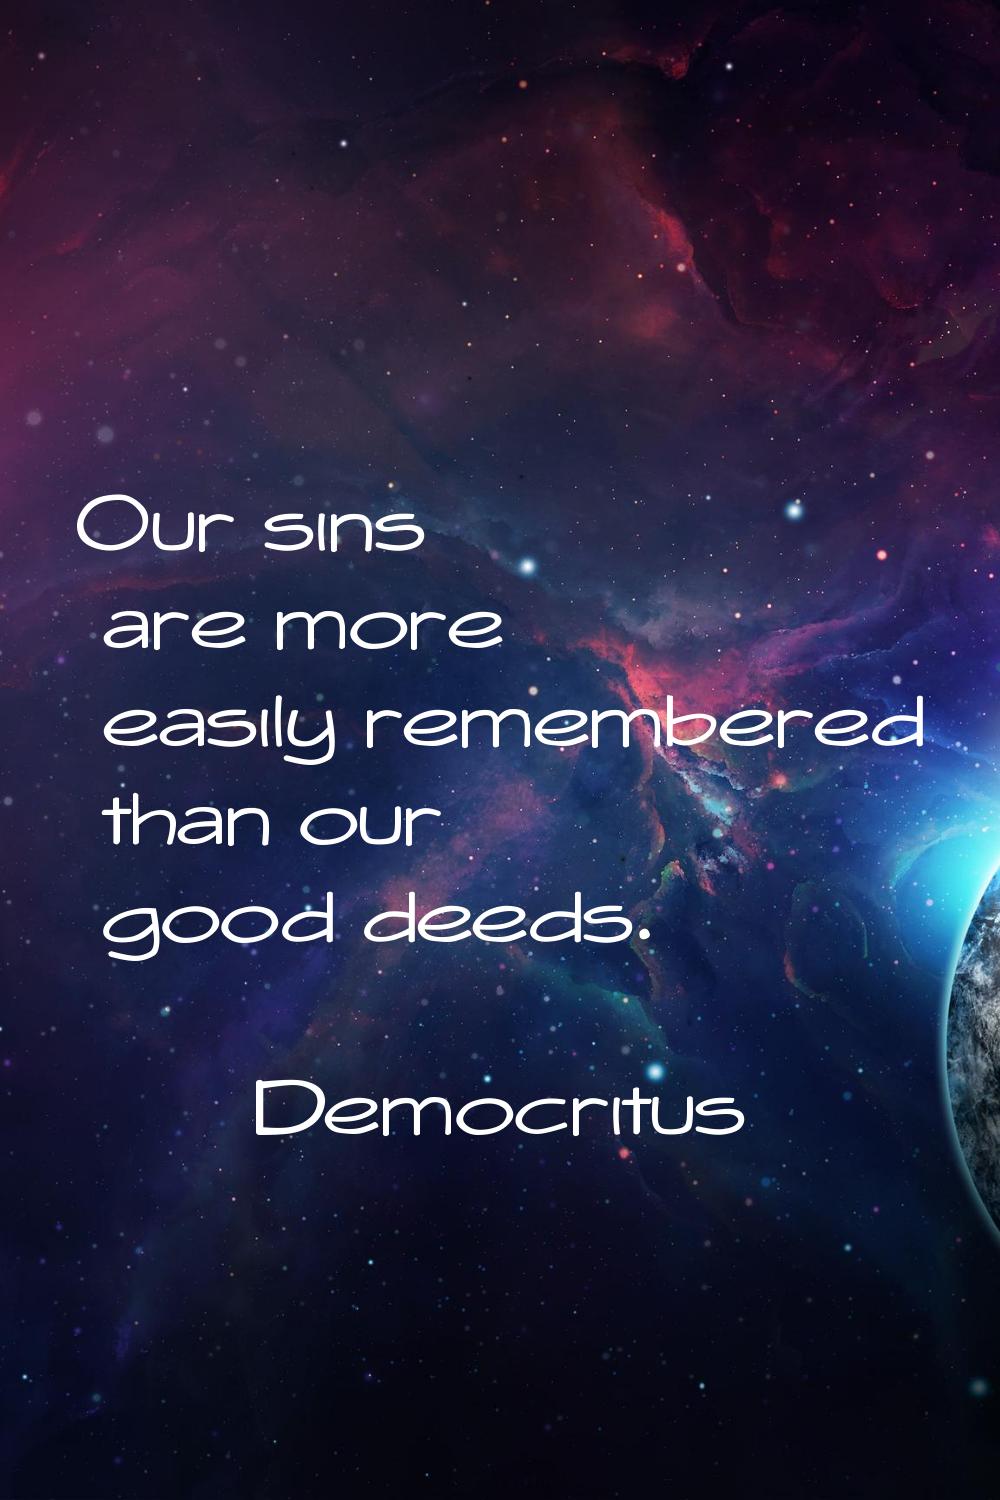 Our sins are more easily remembered than our good deeds.